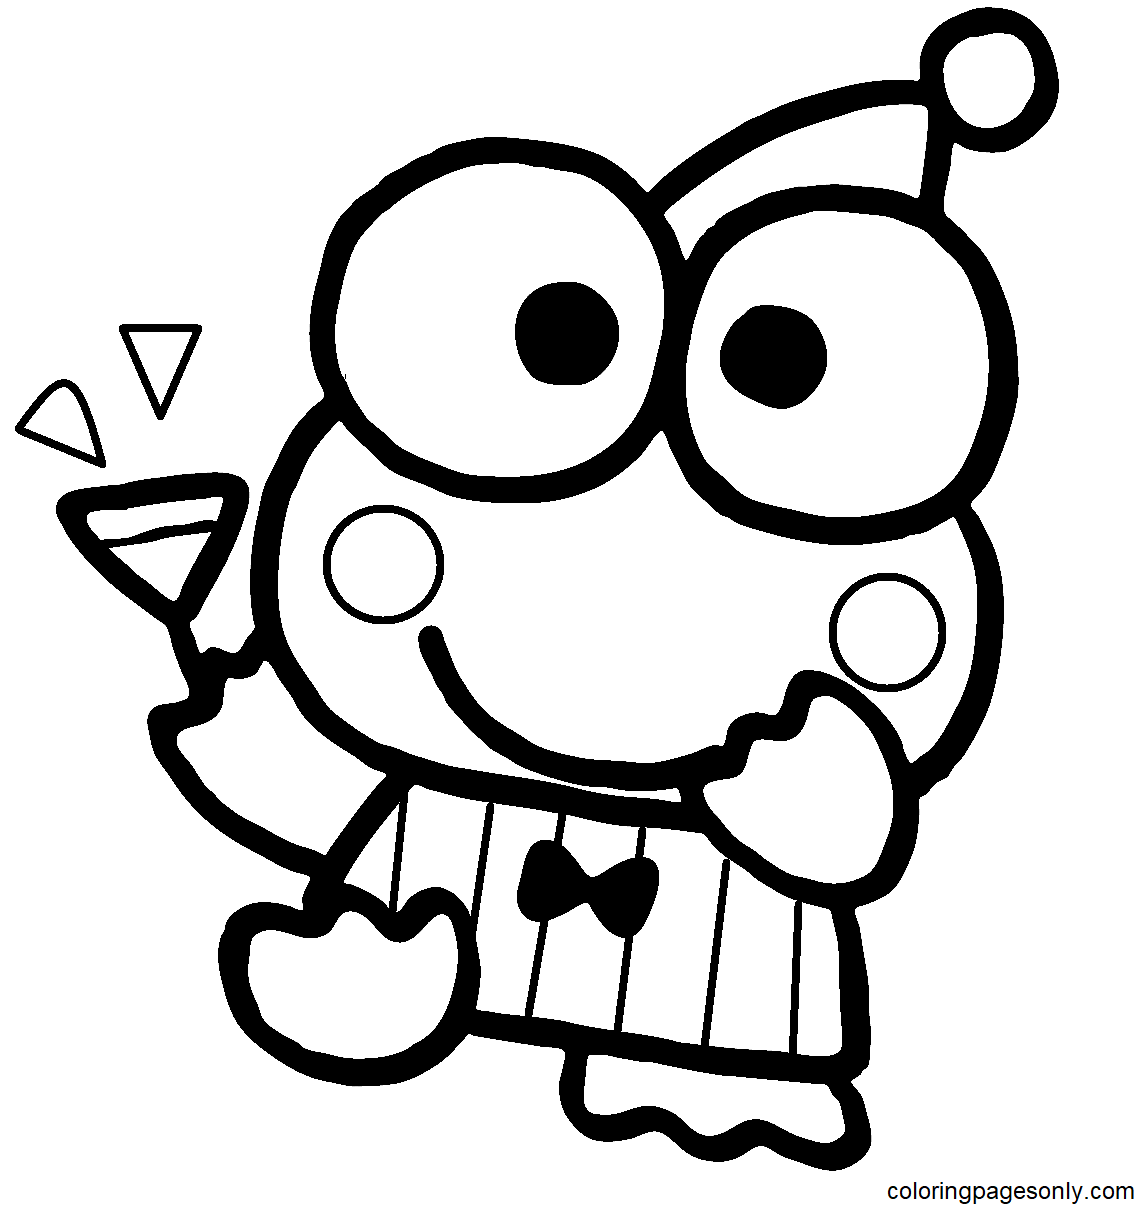 Keroppi Coloring Pages Printable For Free Download